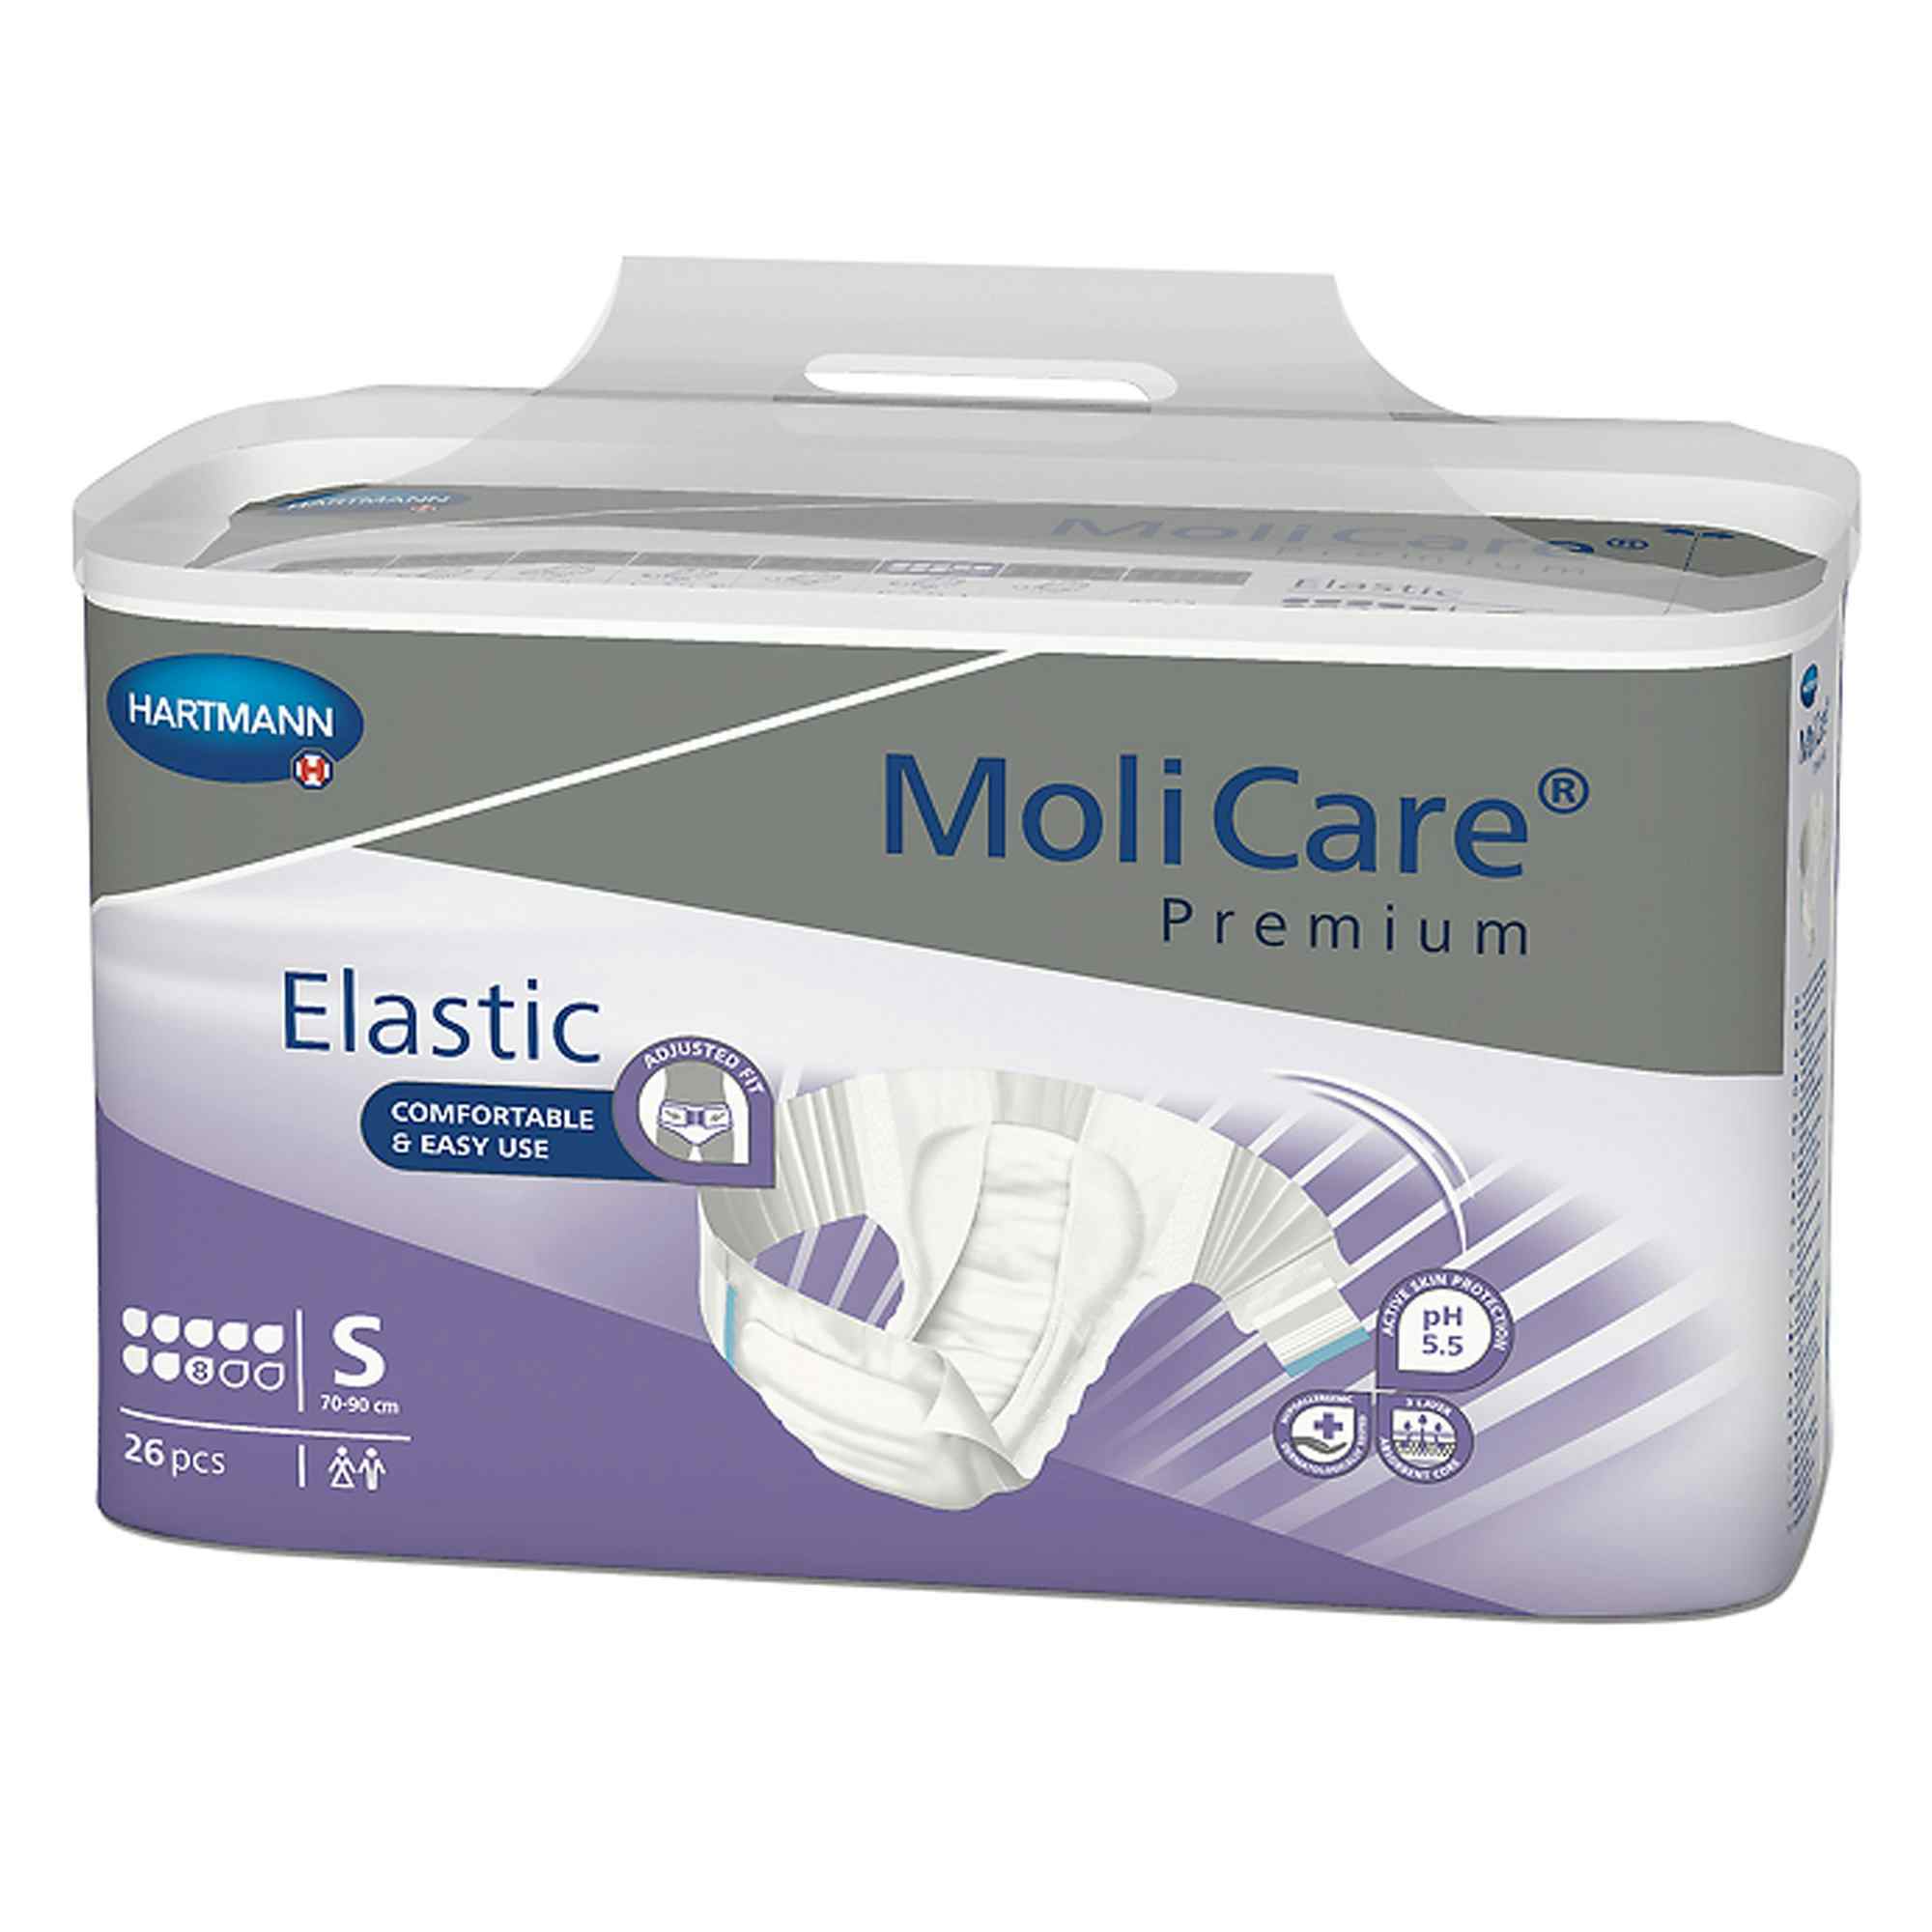 MoliCare Premium 8D Elastic Disposable Brief Adult Diapers with Tabs, Heavy Absorbency